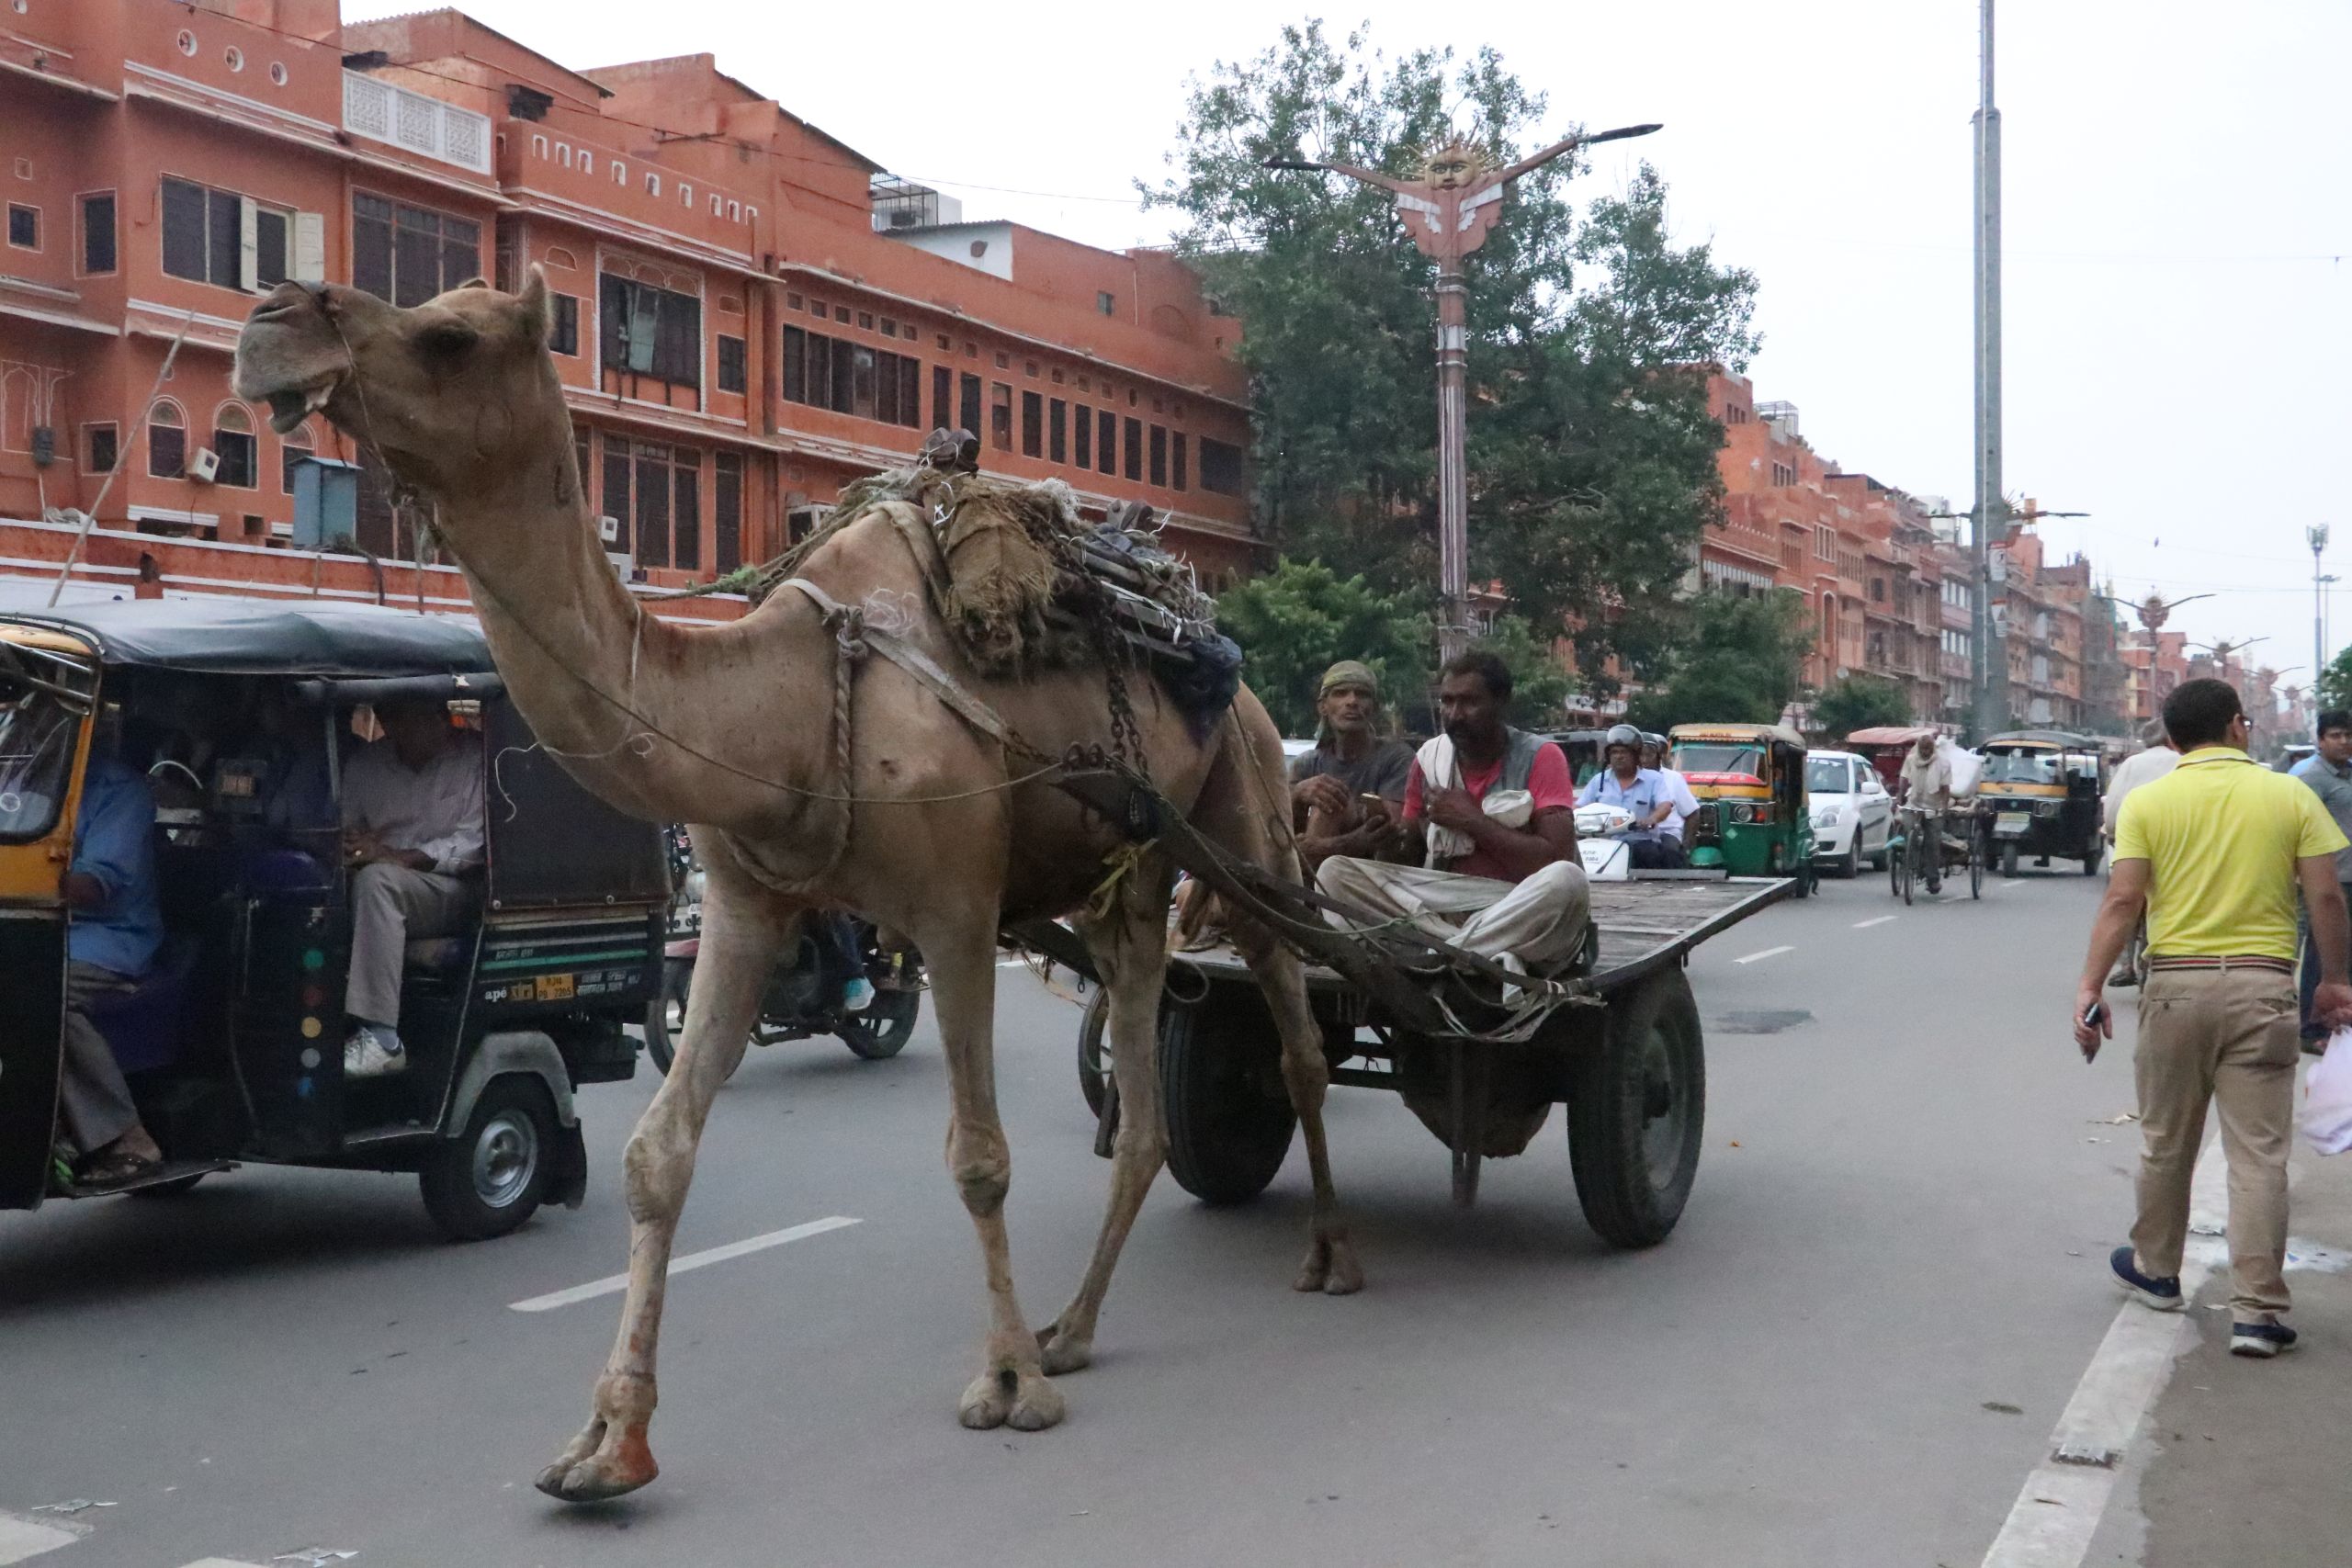 Camel Carriage in streets of Jaipur